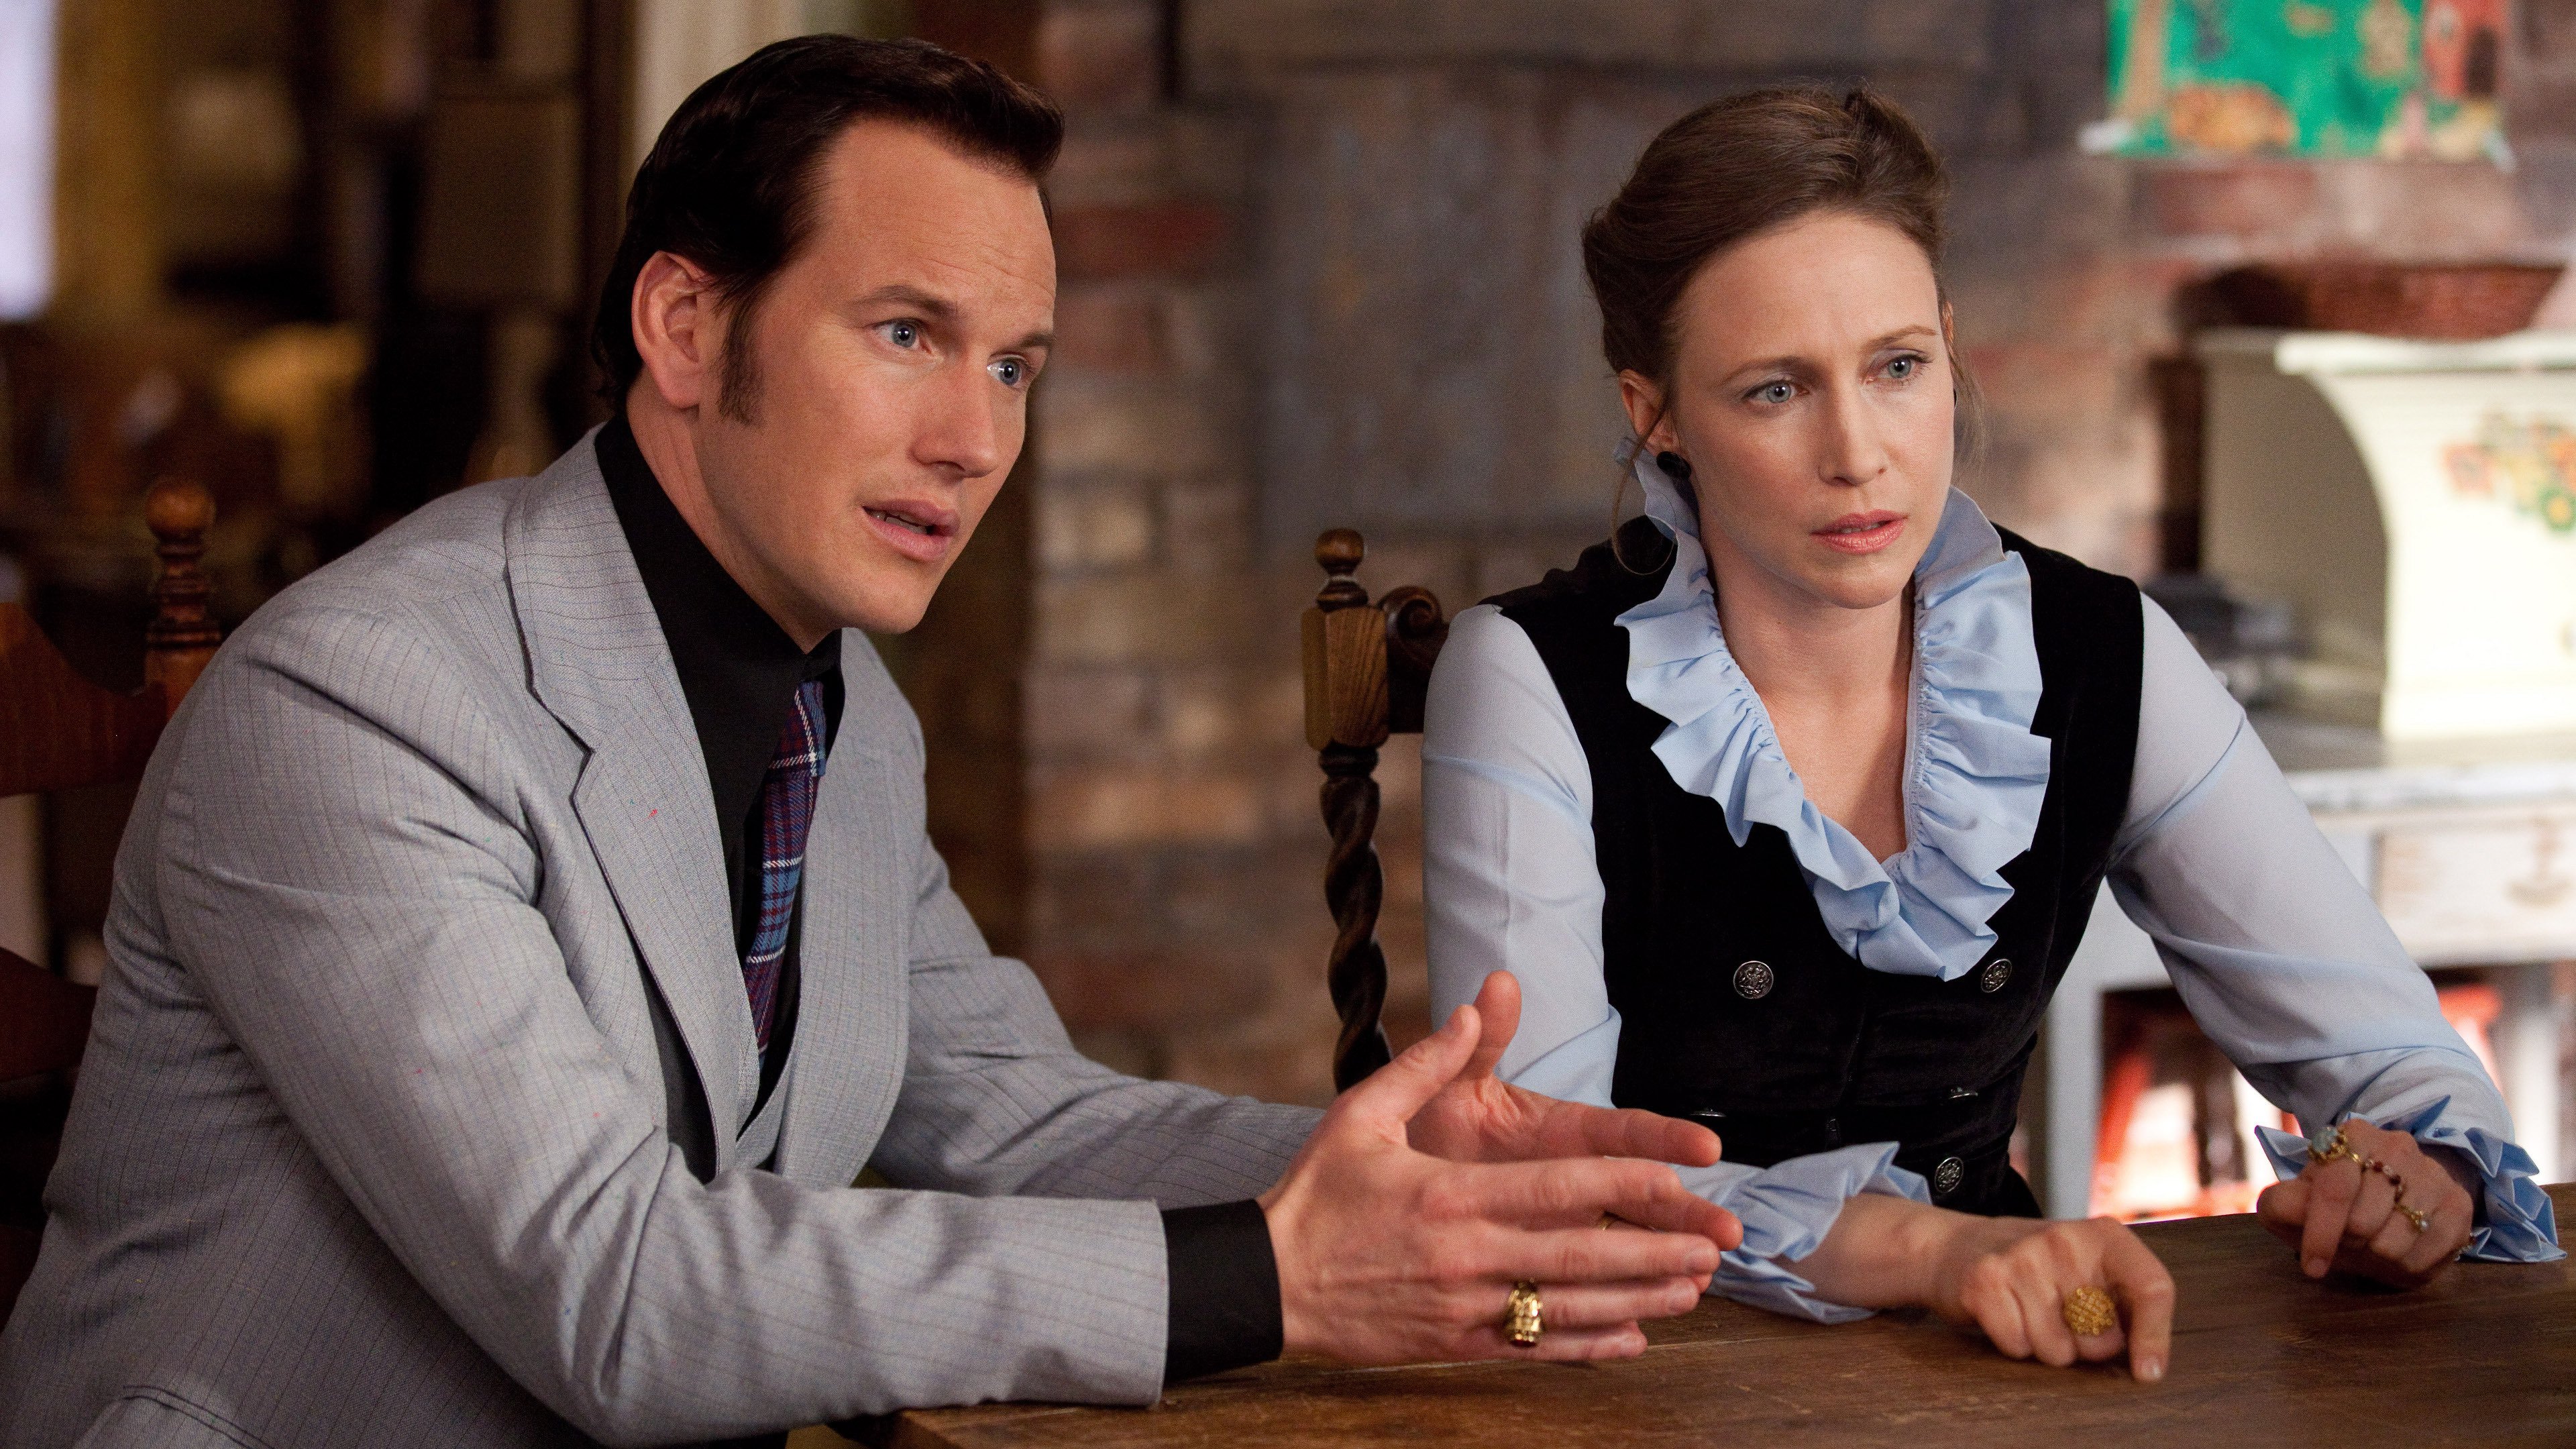 Patrick Wilson and Vera Farmiga looked concerned in "The Conjuring"